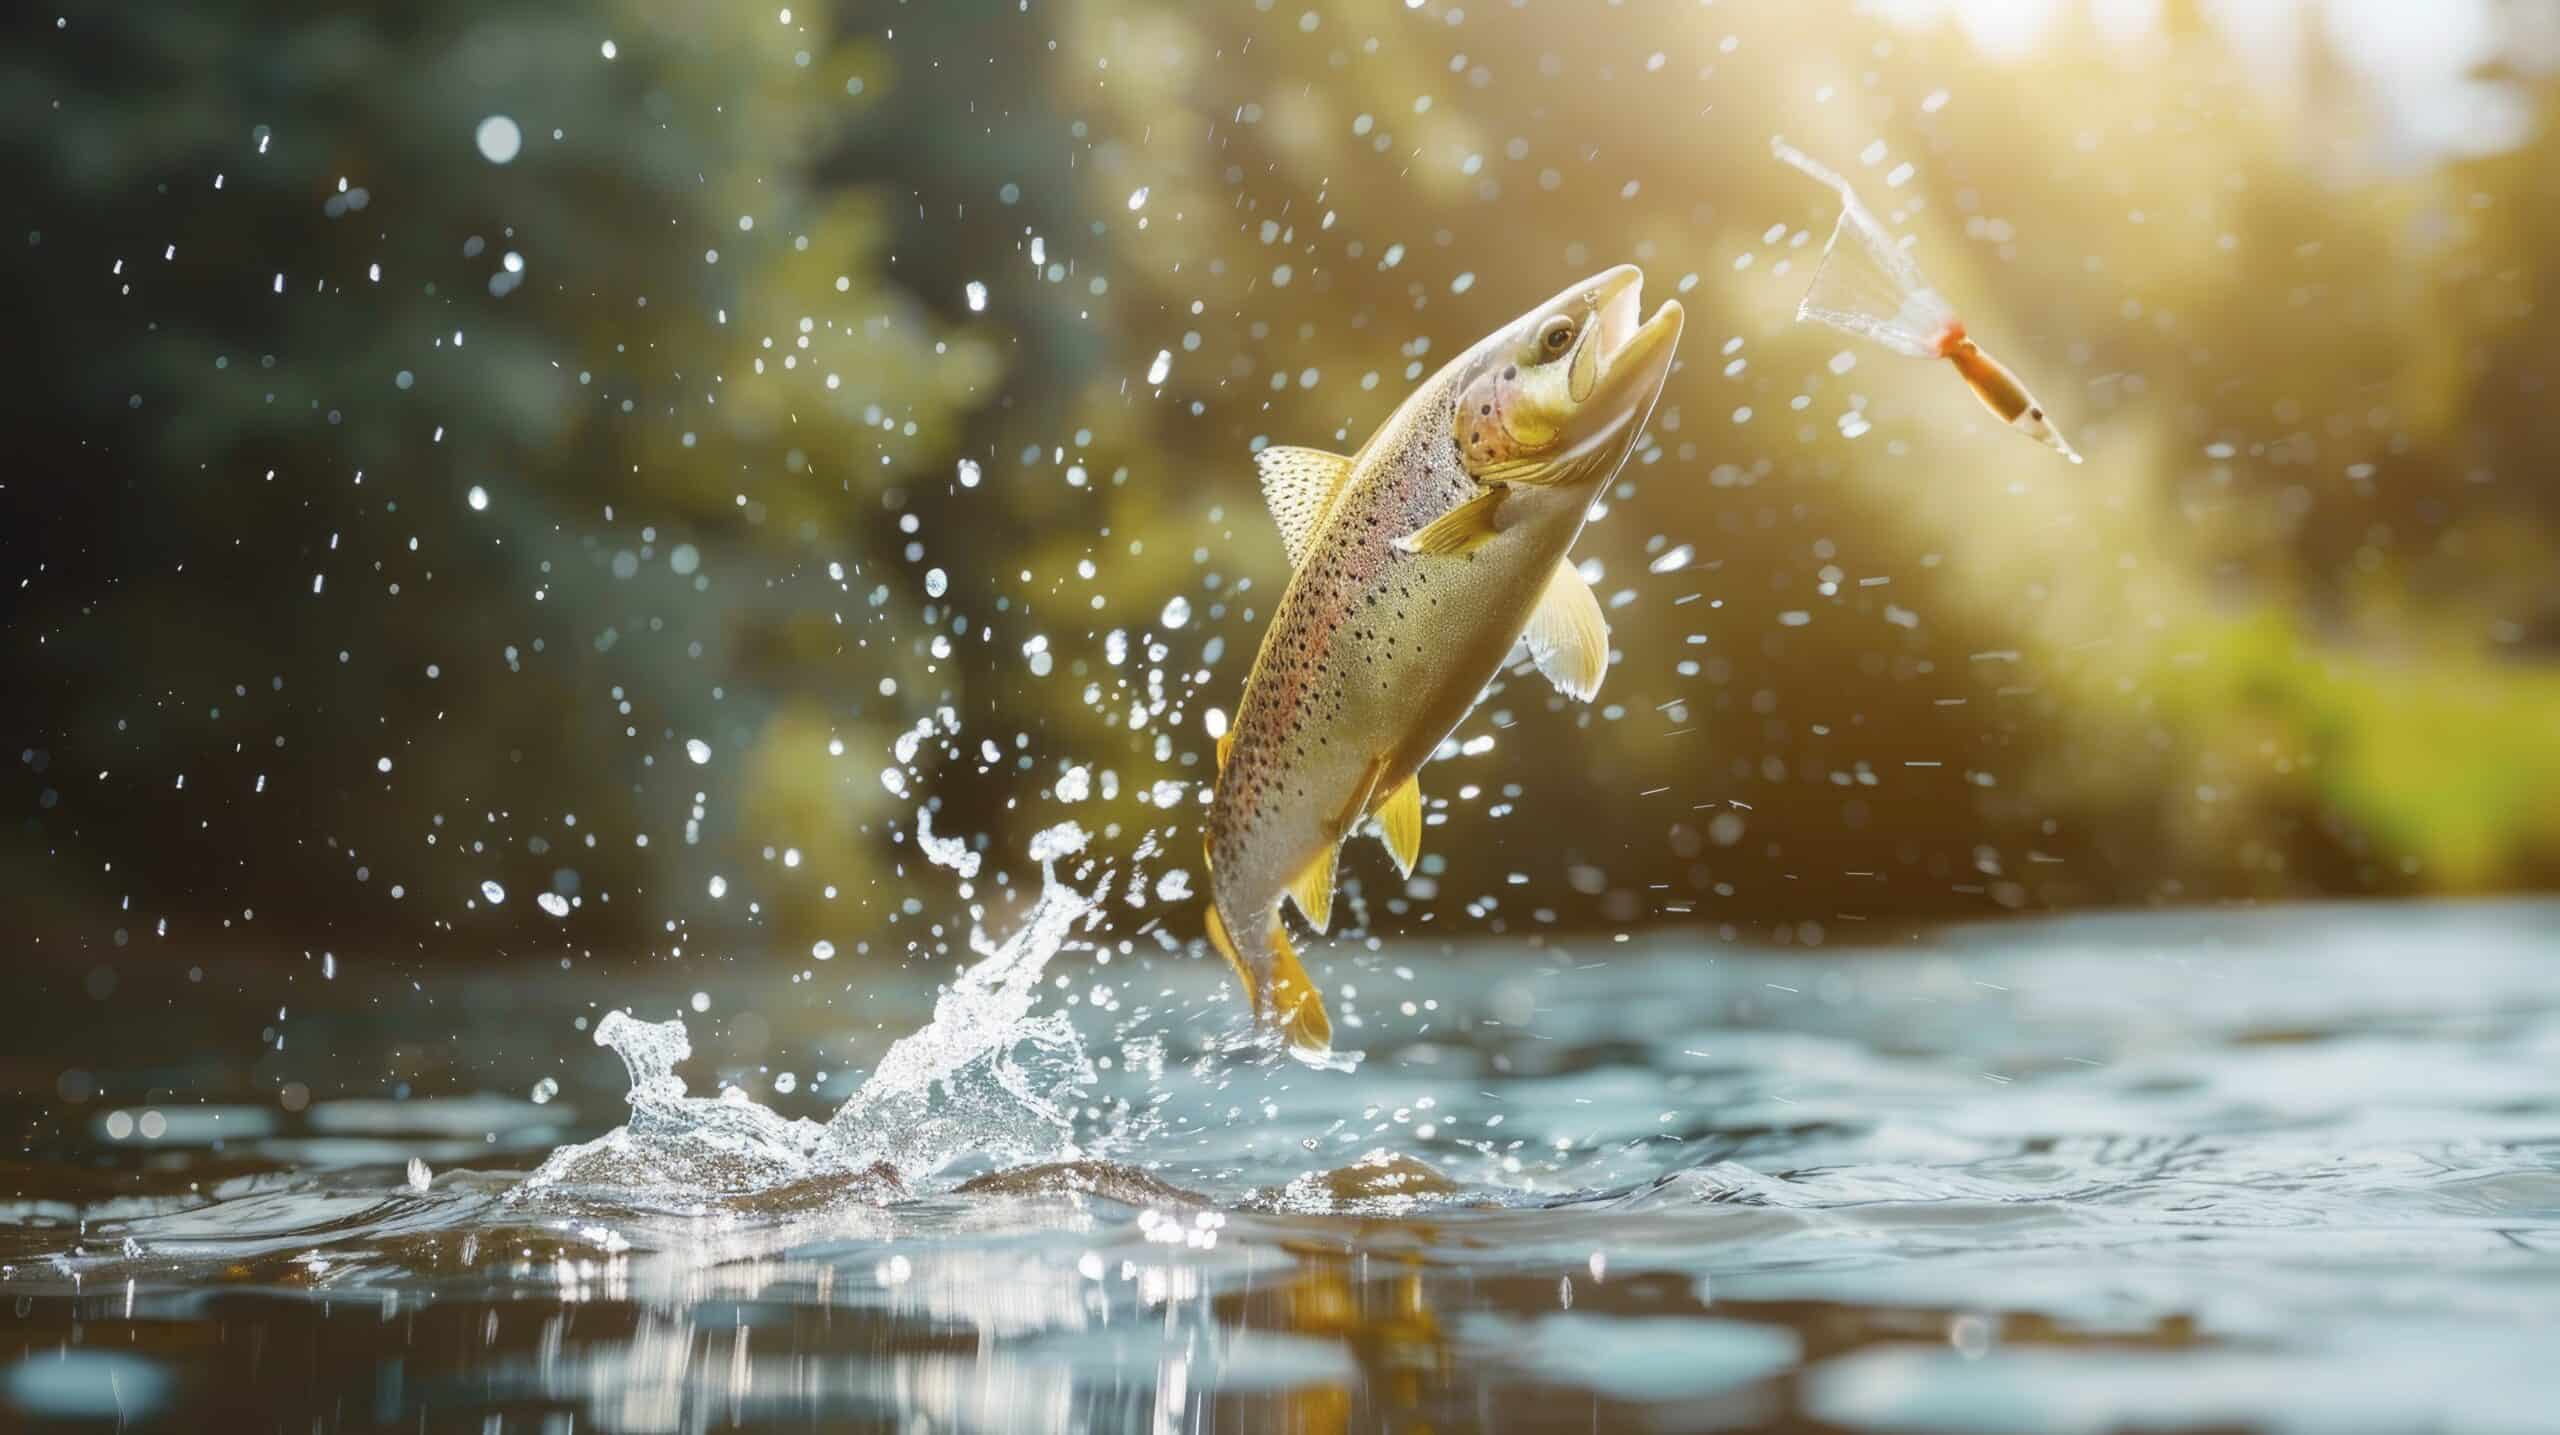 fanatic4fishing.com : Is fly fishing or spinning better for trout?